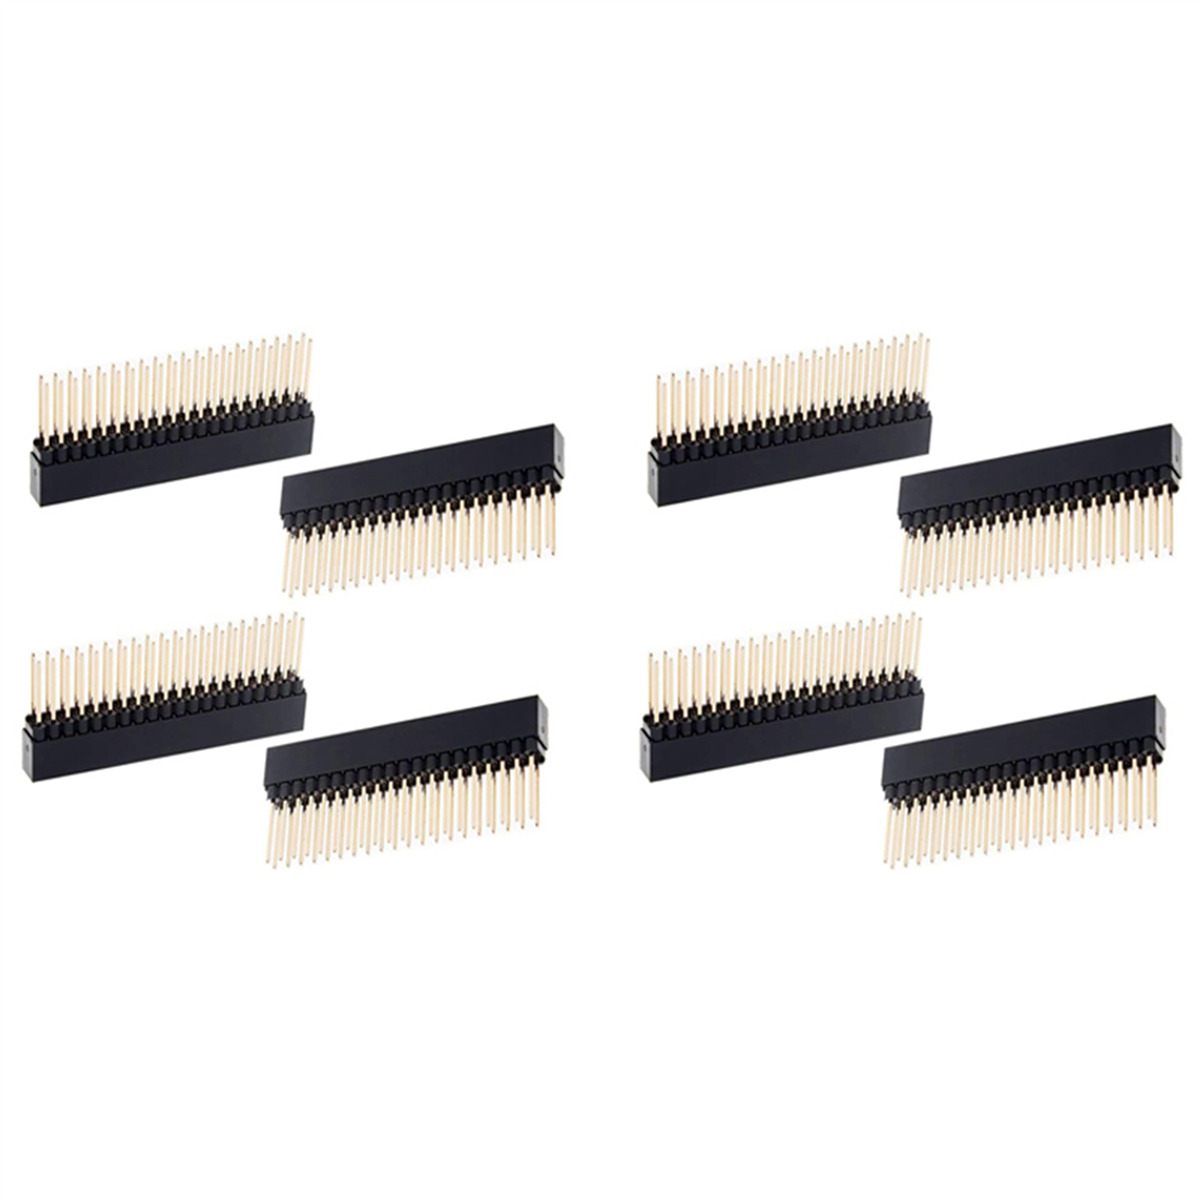 2 x 20(40 Pin) Stacking Header for  A+/B+/Pi 2/Pi 3 Extra Tall Header (Packed